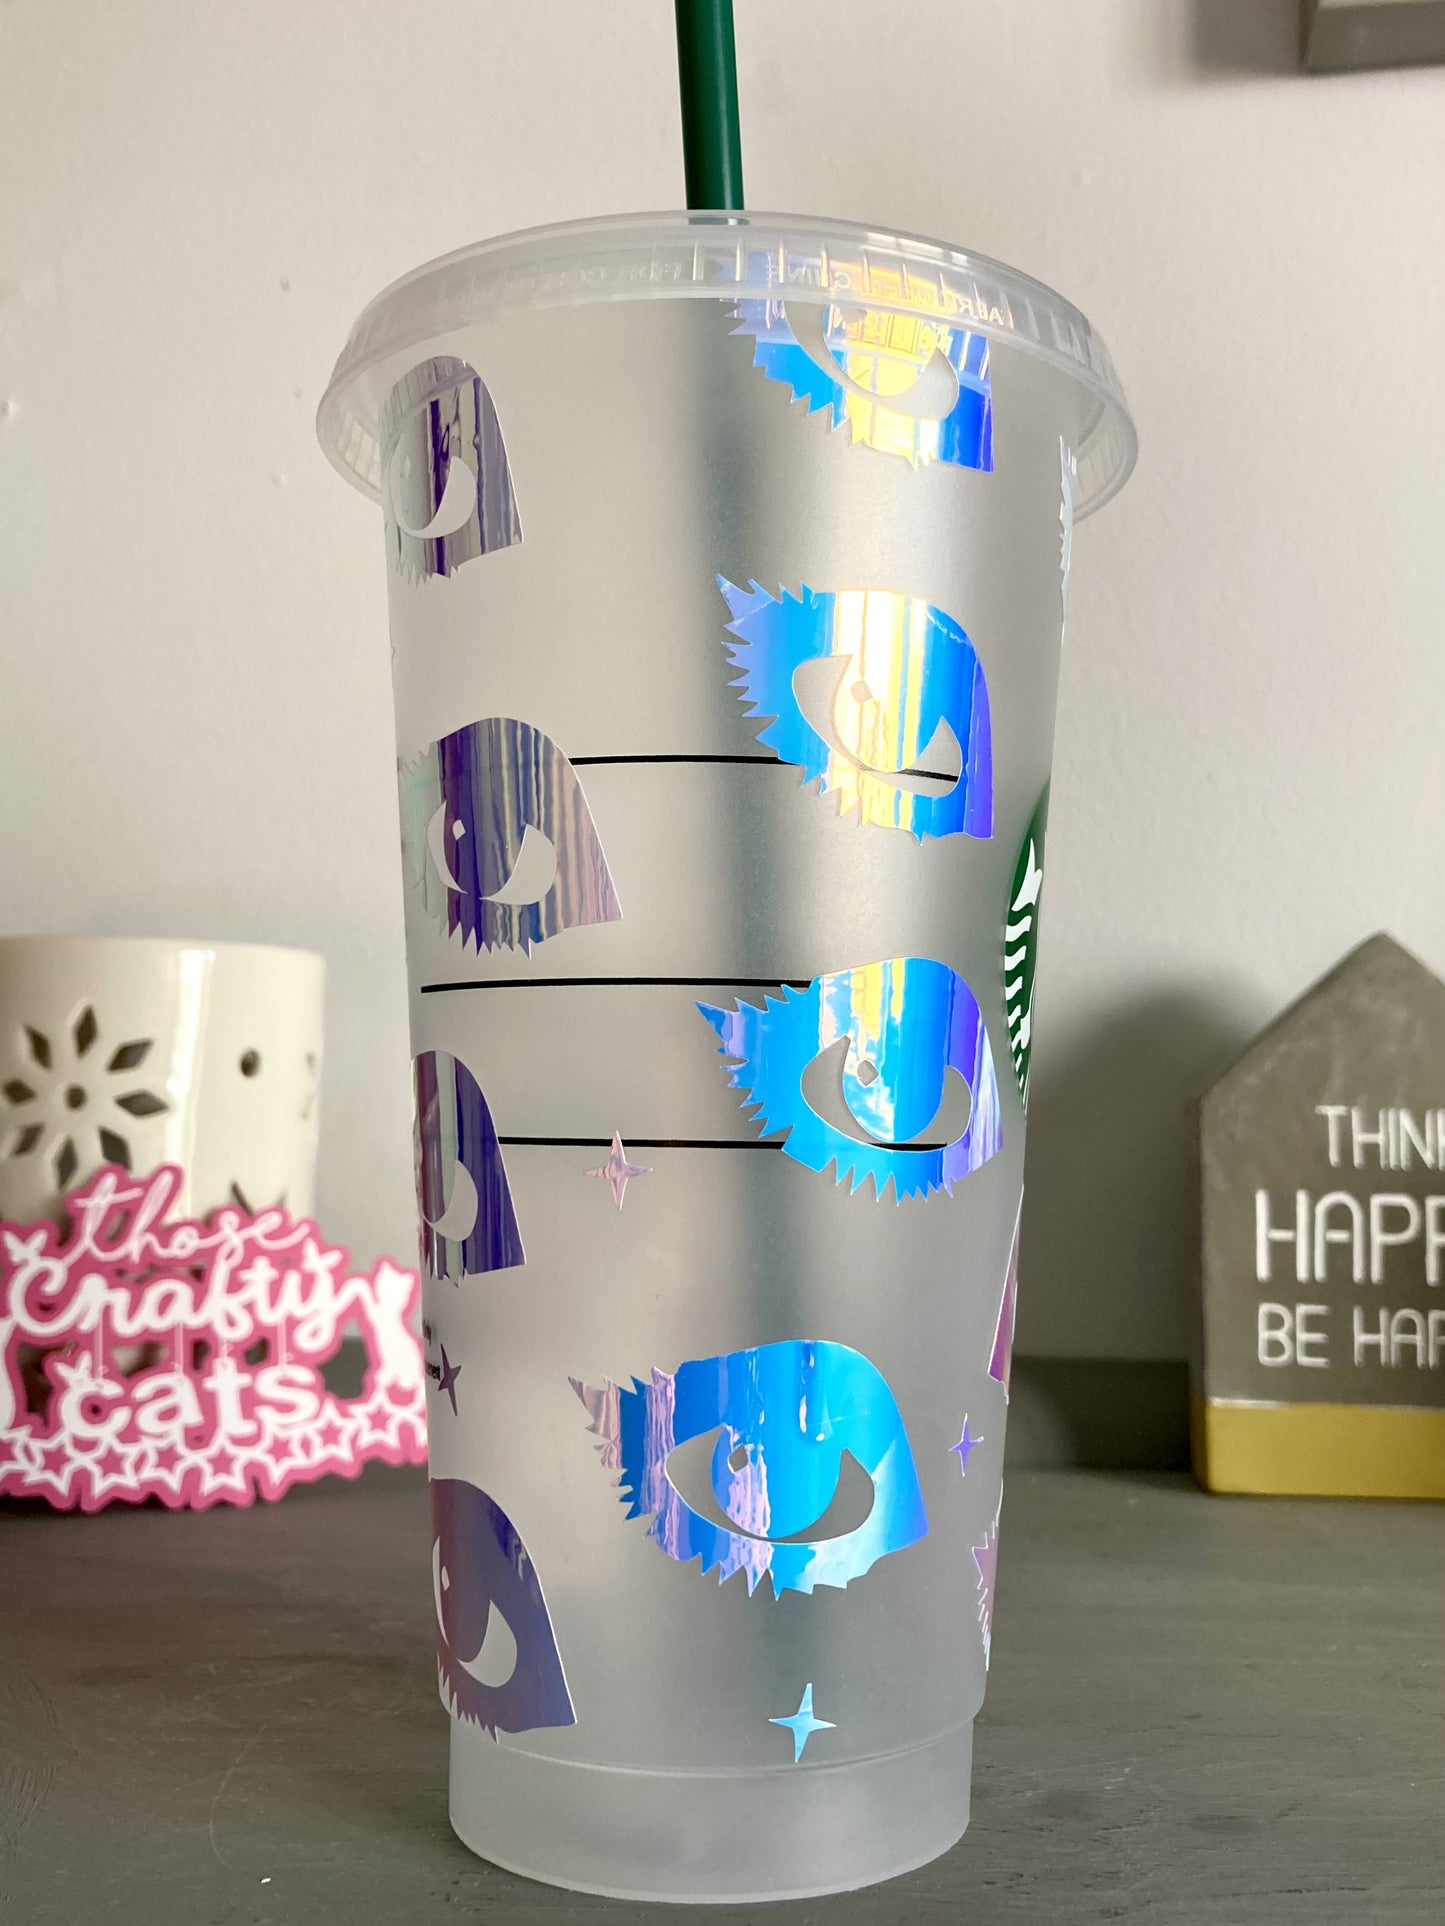 Custom Starbucks inspired reusable cold cup tumbler with straw - holographic eyes design